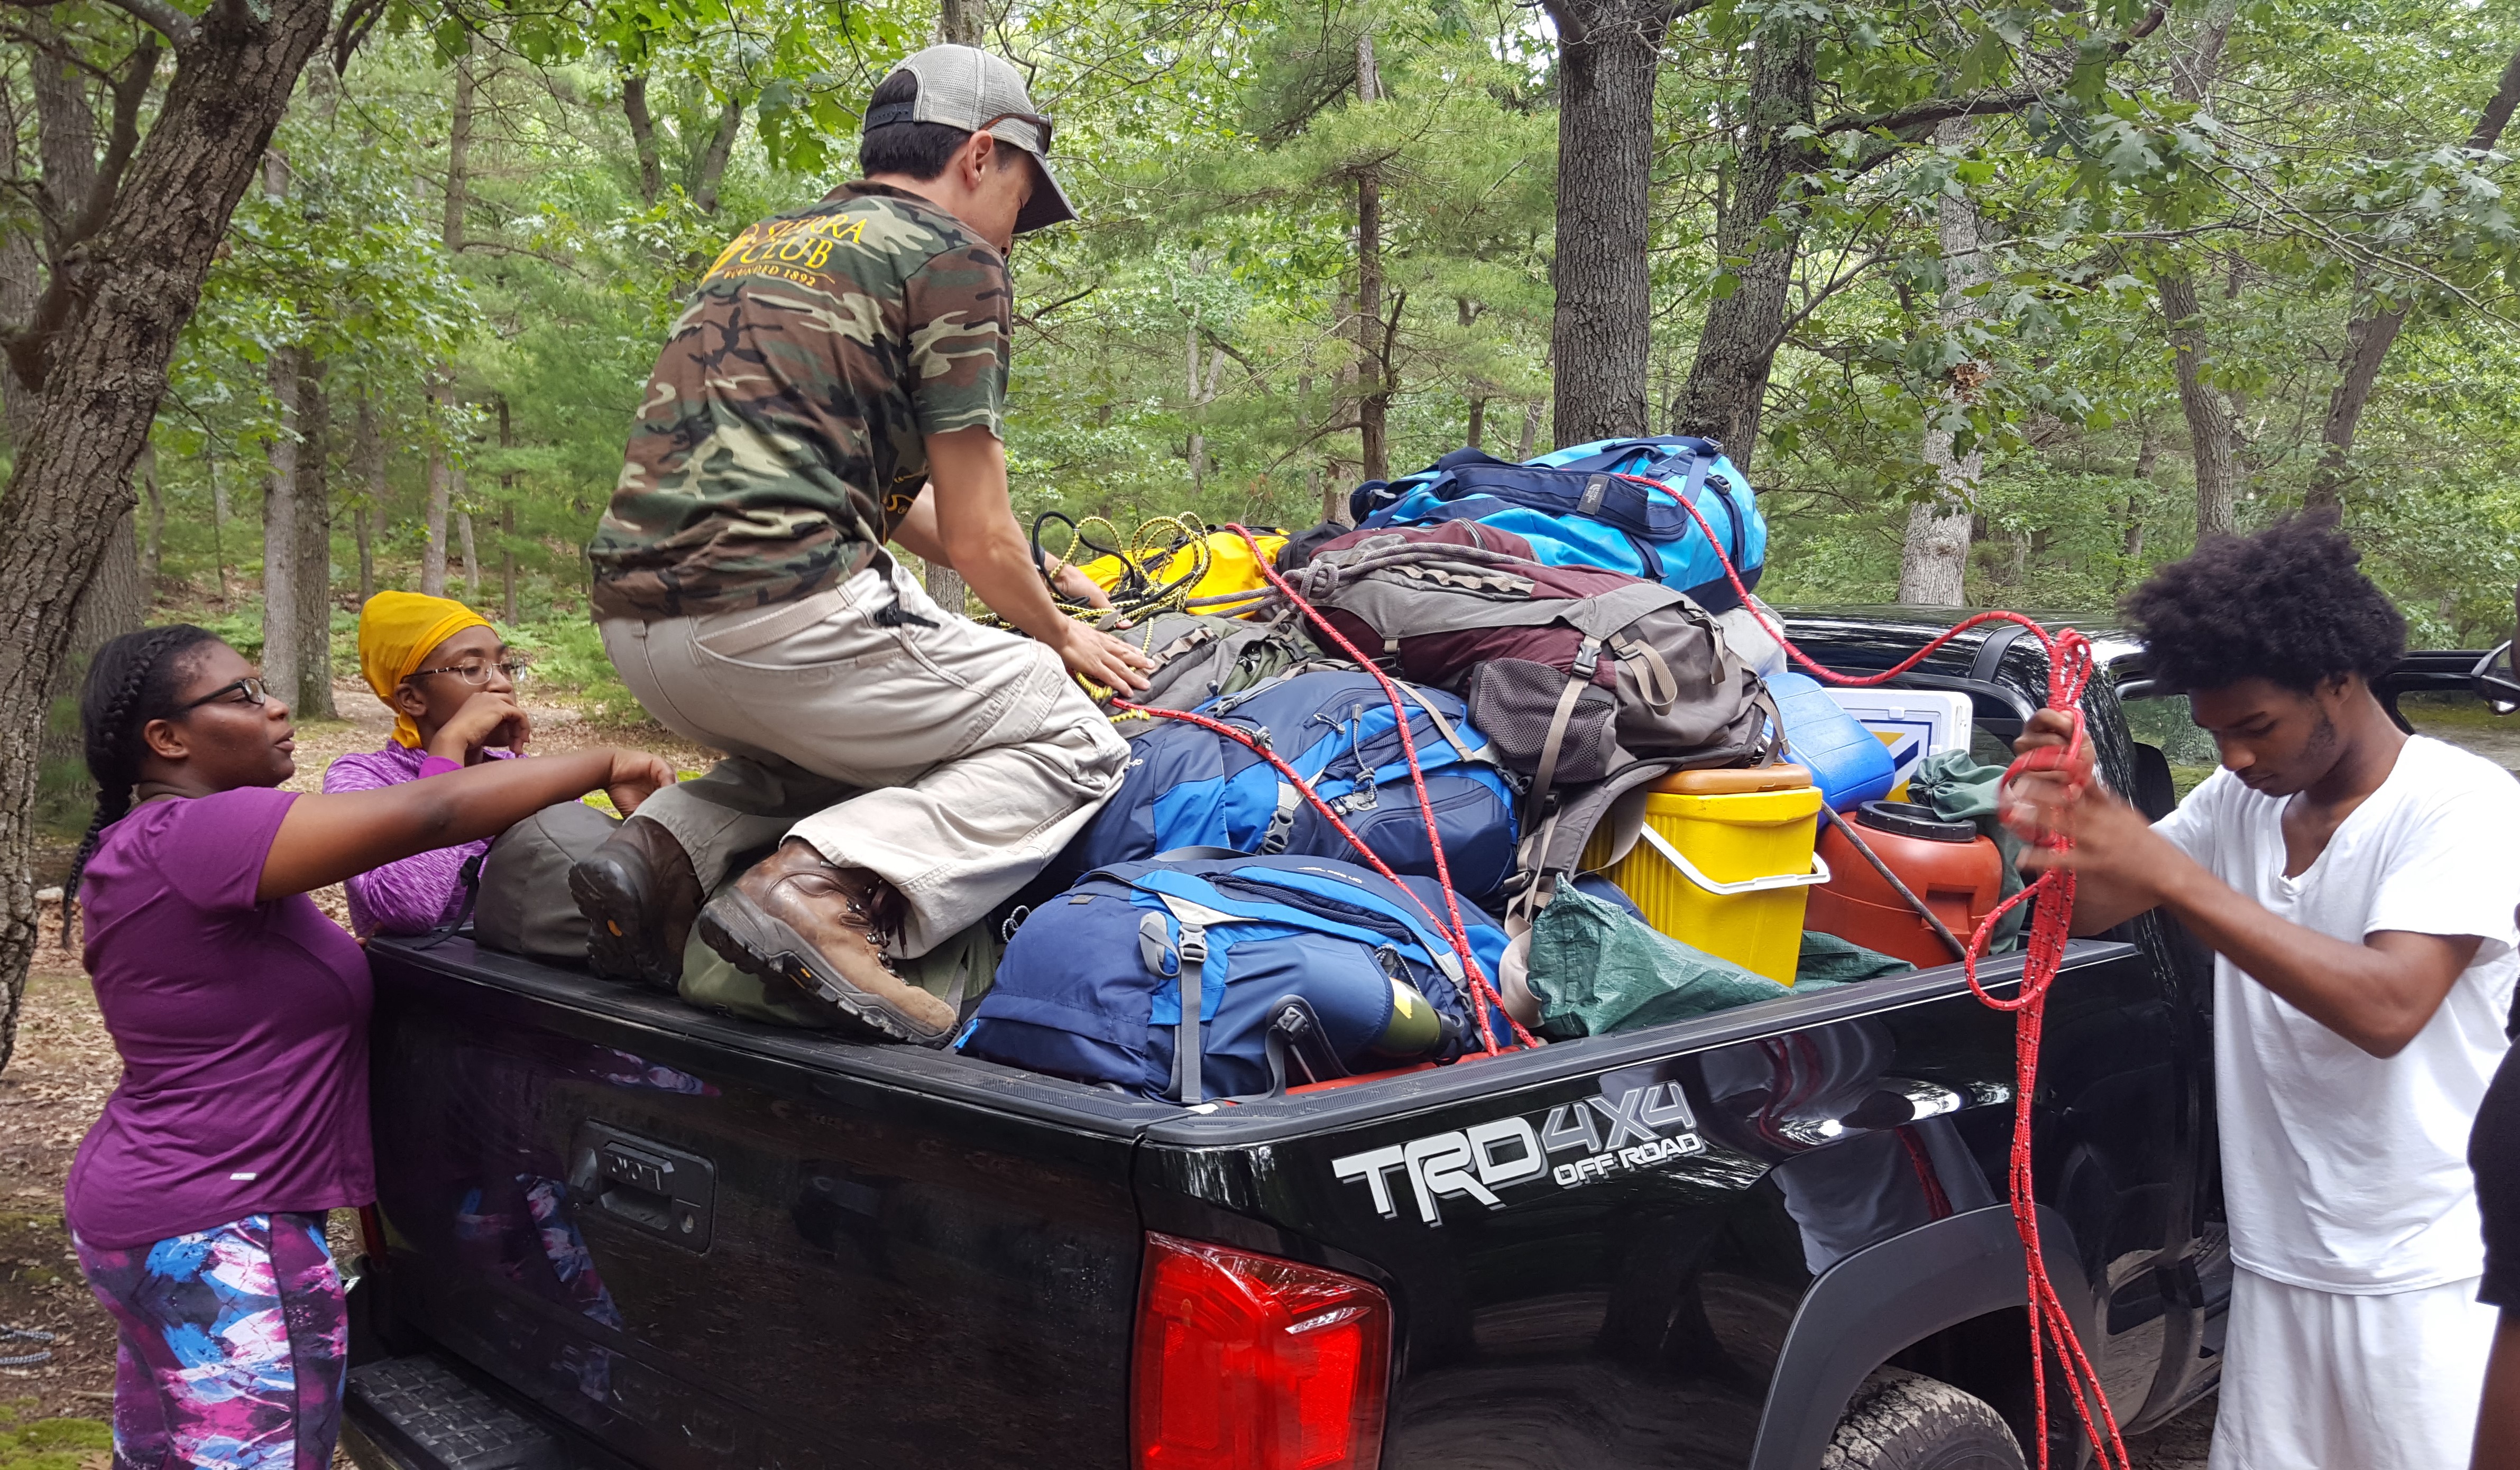 Detroit ICO participants unpack all of their equipment at the campsite.